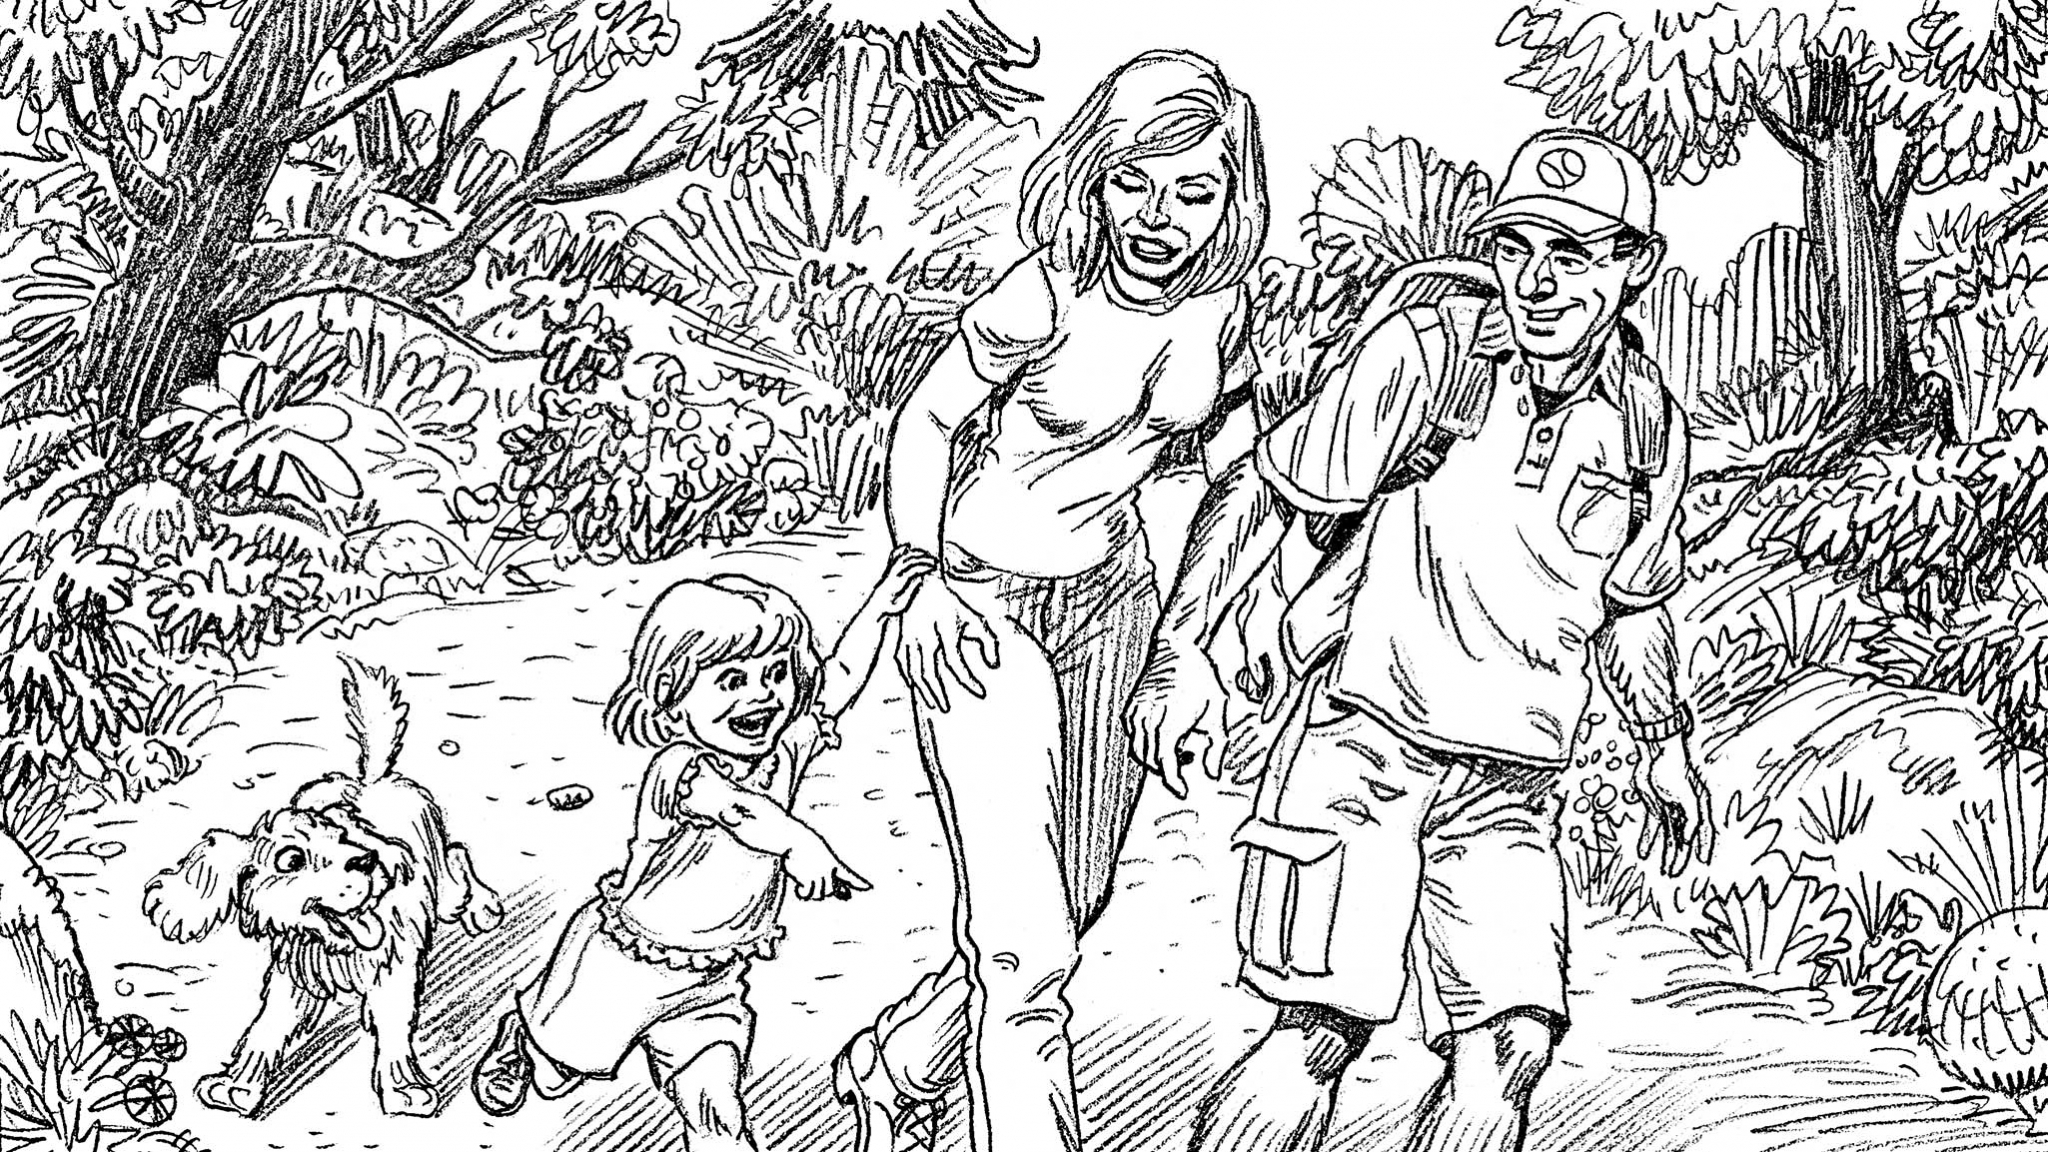 KH3152A01-outdoors-hiking-family